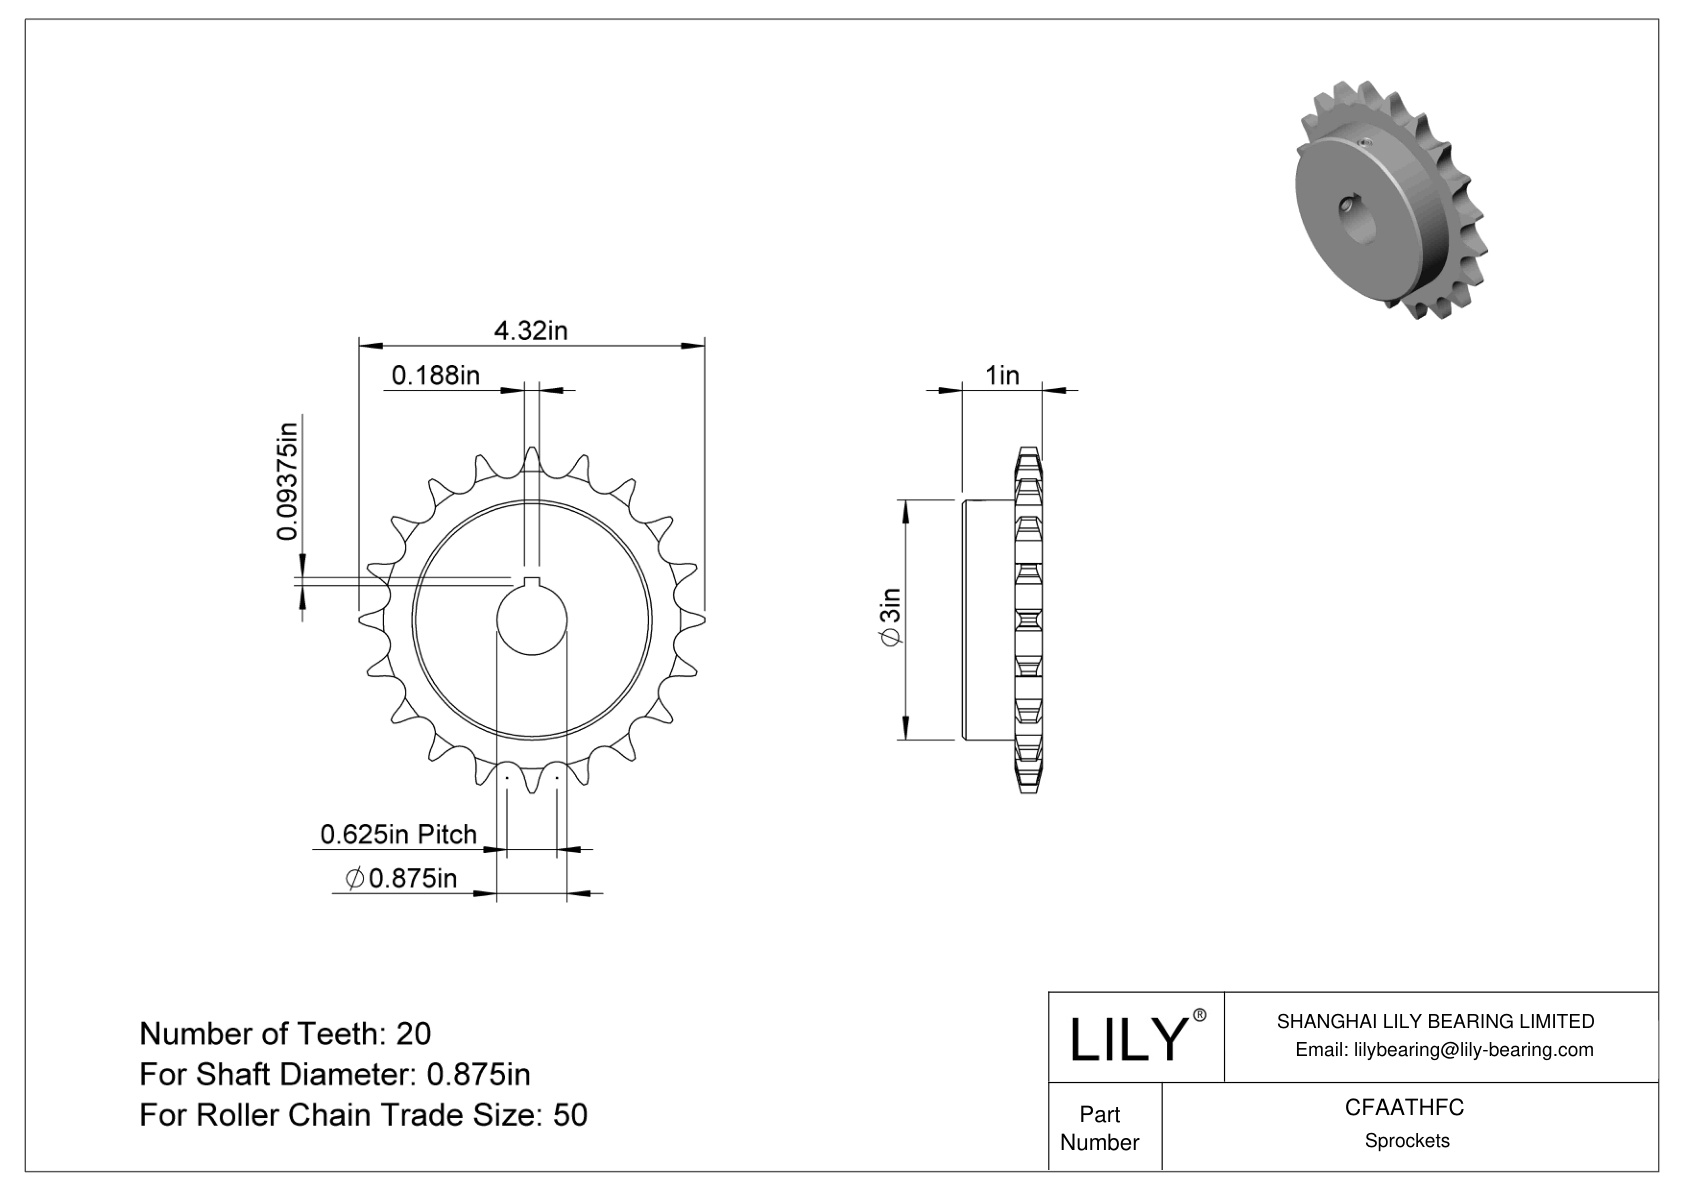 CFAATHFC Wear-Resistant Sprockets for ANSI Roller Chain cad drawing